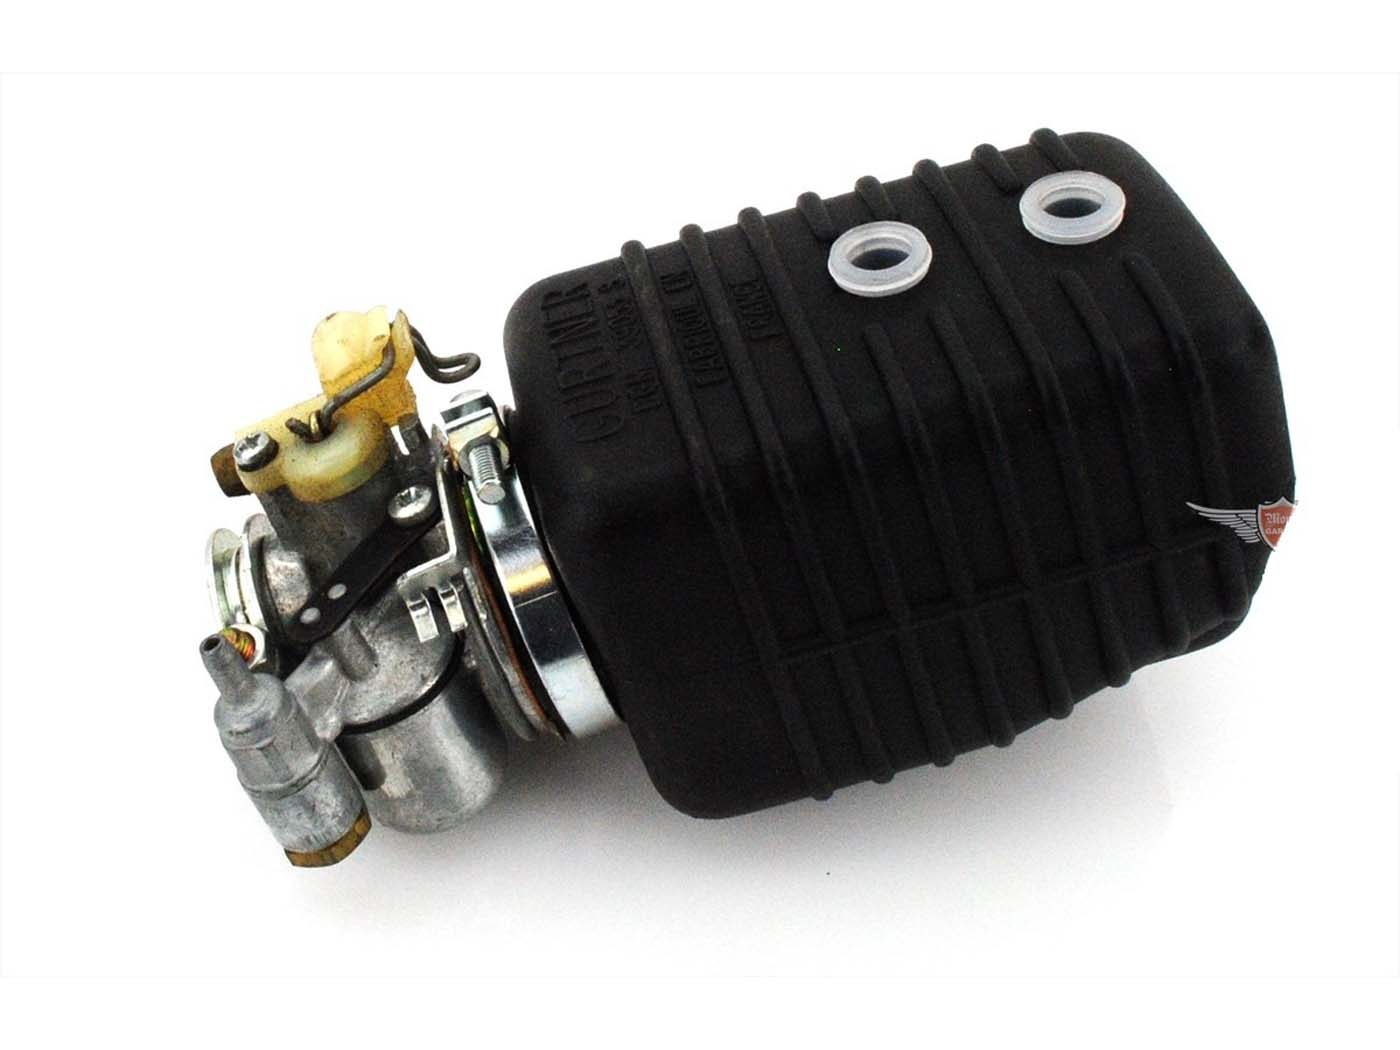 Carburetor Air Filter Box 19mm For Peugeot Motobecan Mobylette Moped Moped